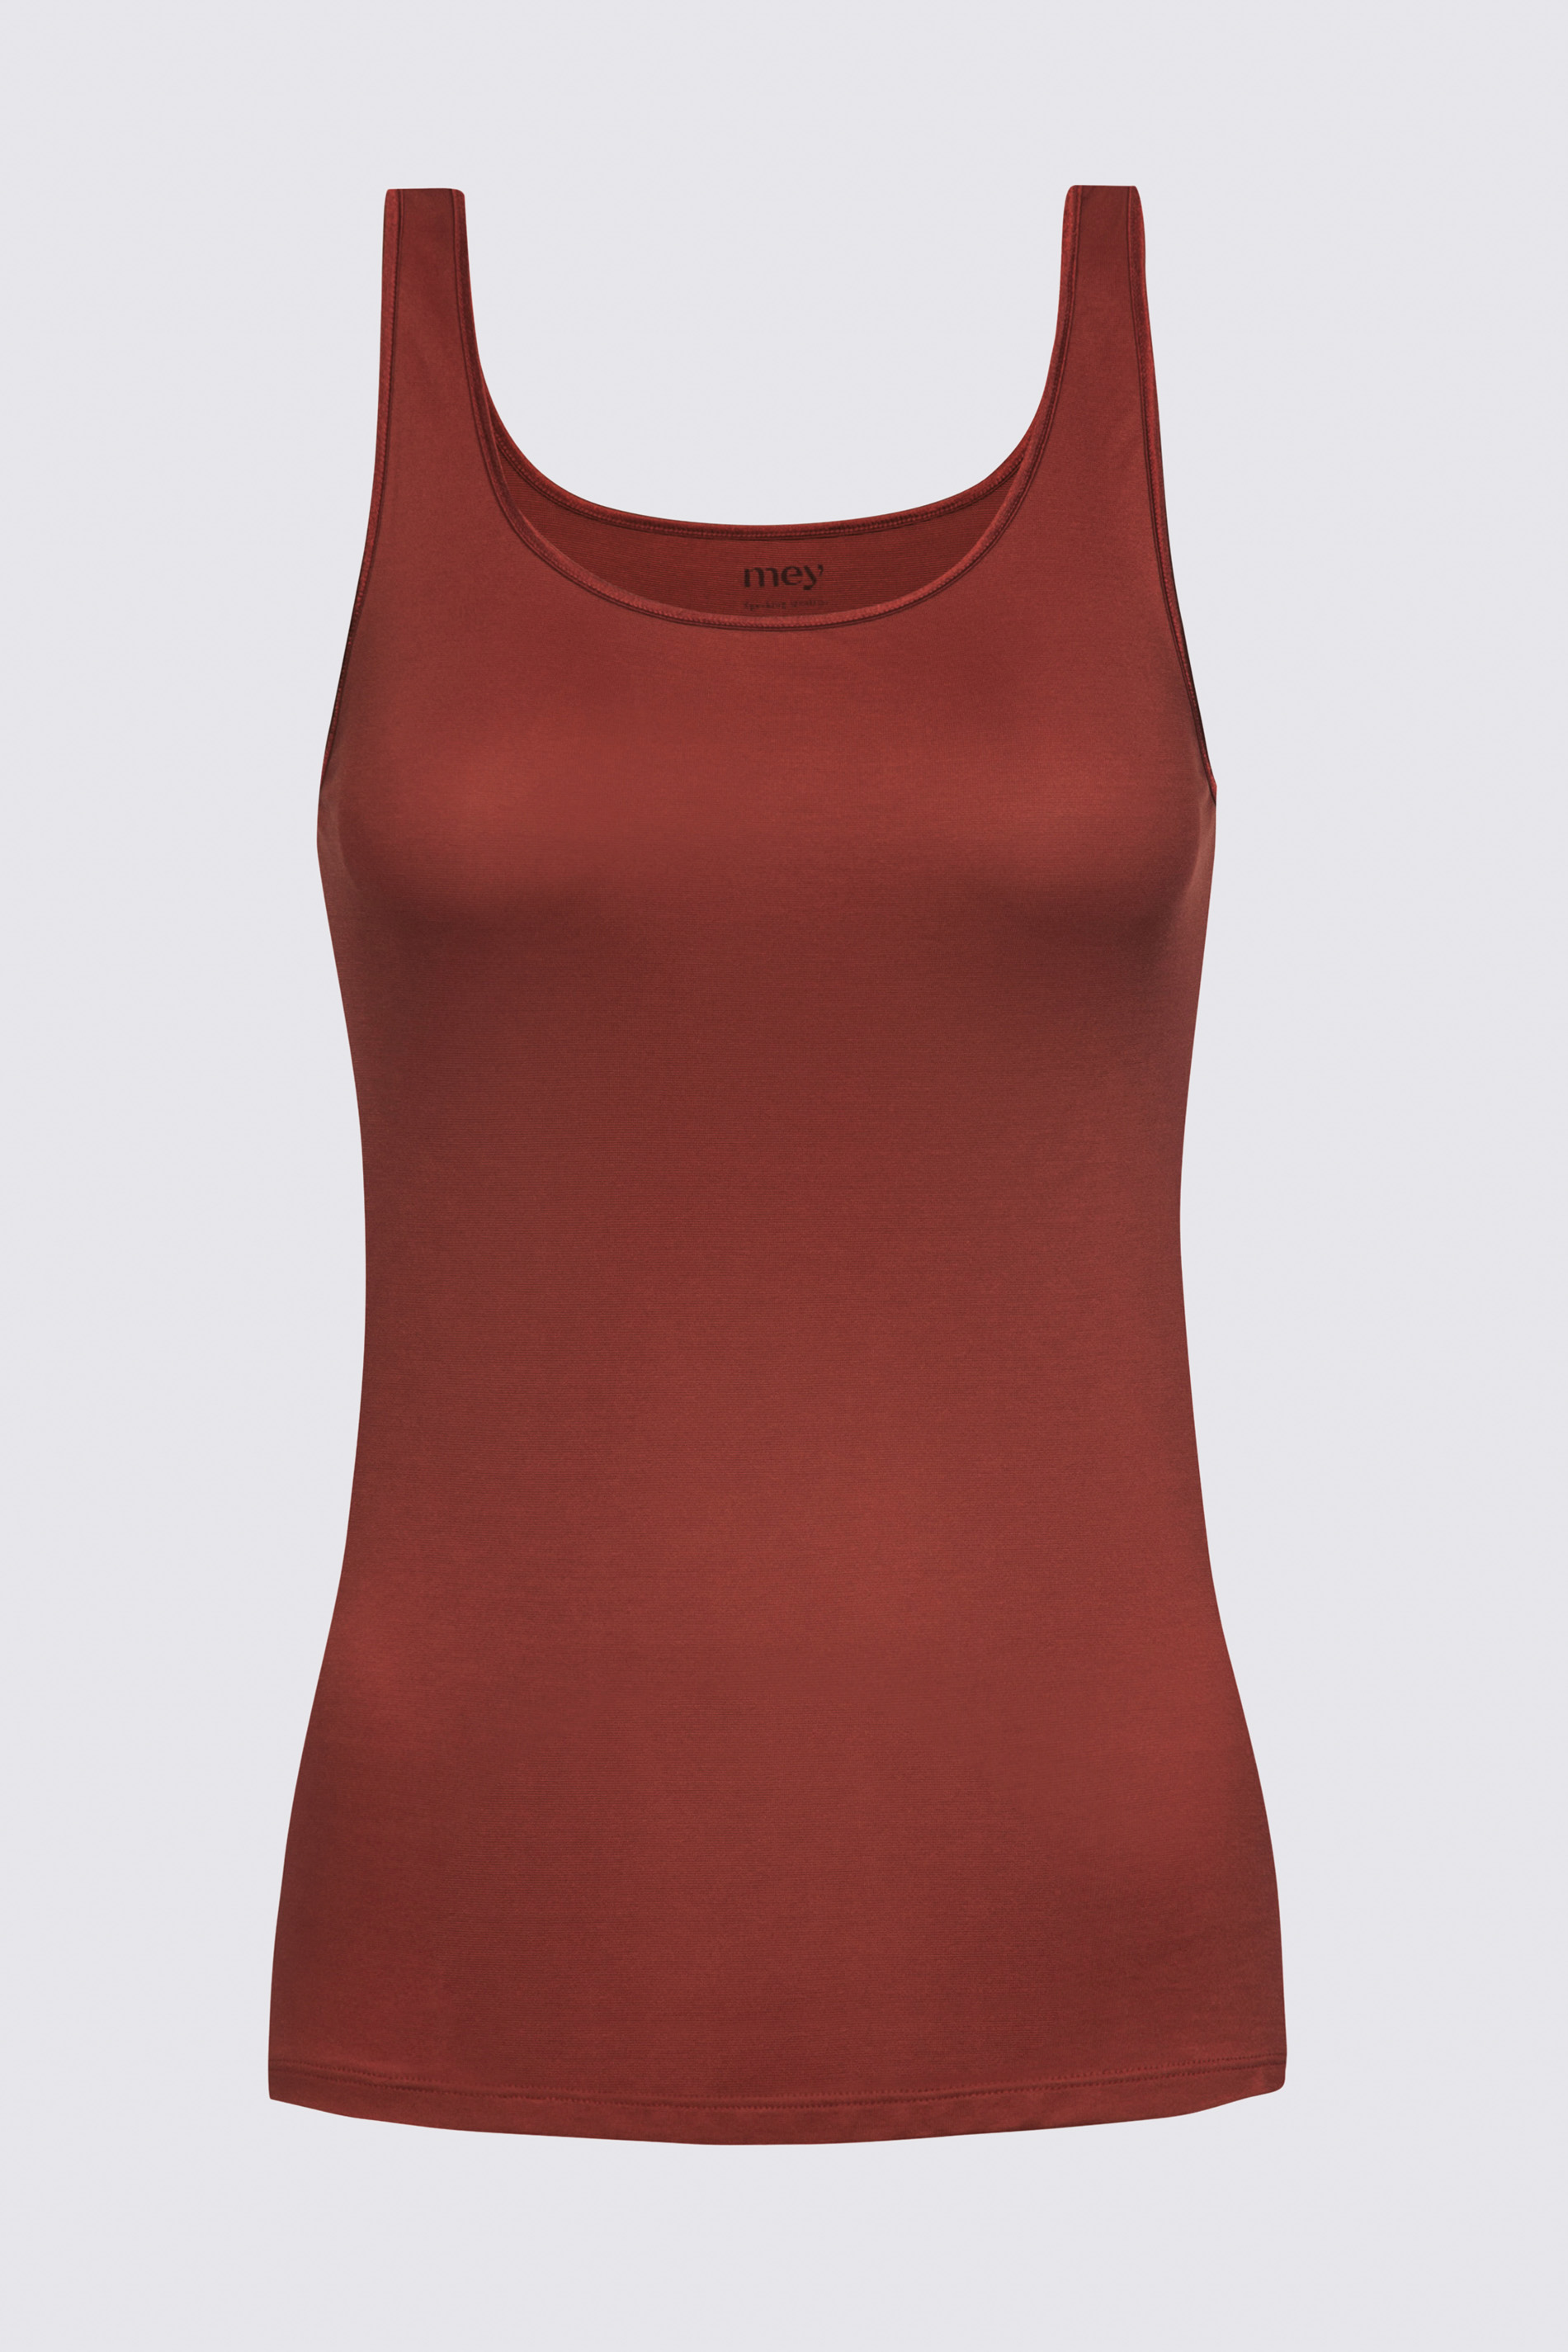 Camisole Red Pepper Serie Emotion Cut Out | mey®